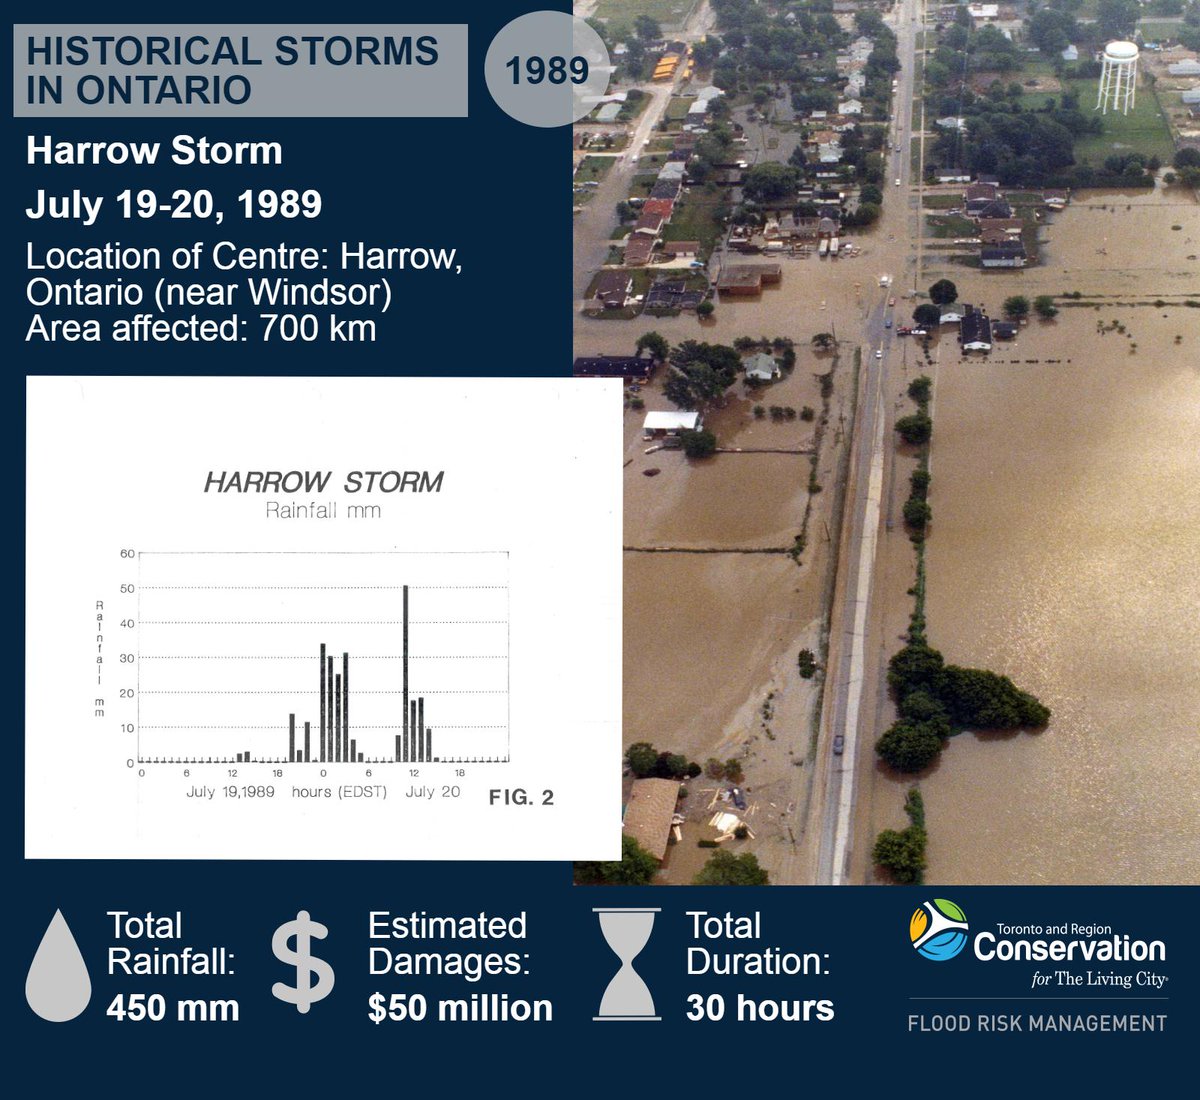 #Harrowstorm July 1989 #Historicalstorms #FloodFacts #WaterSafety #TRCAflood ow.ly/bPQK30cQiBk